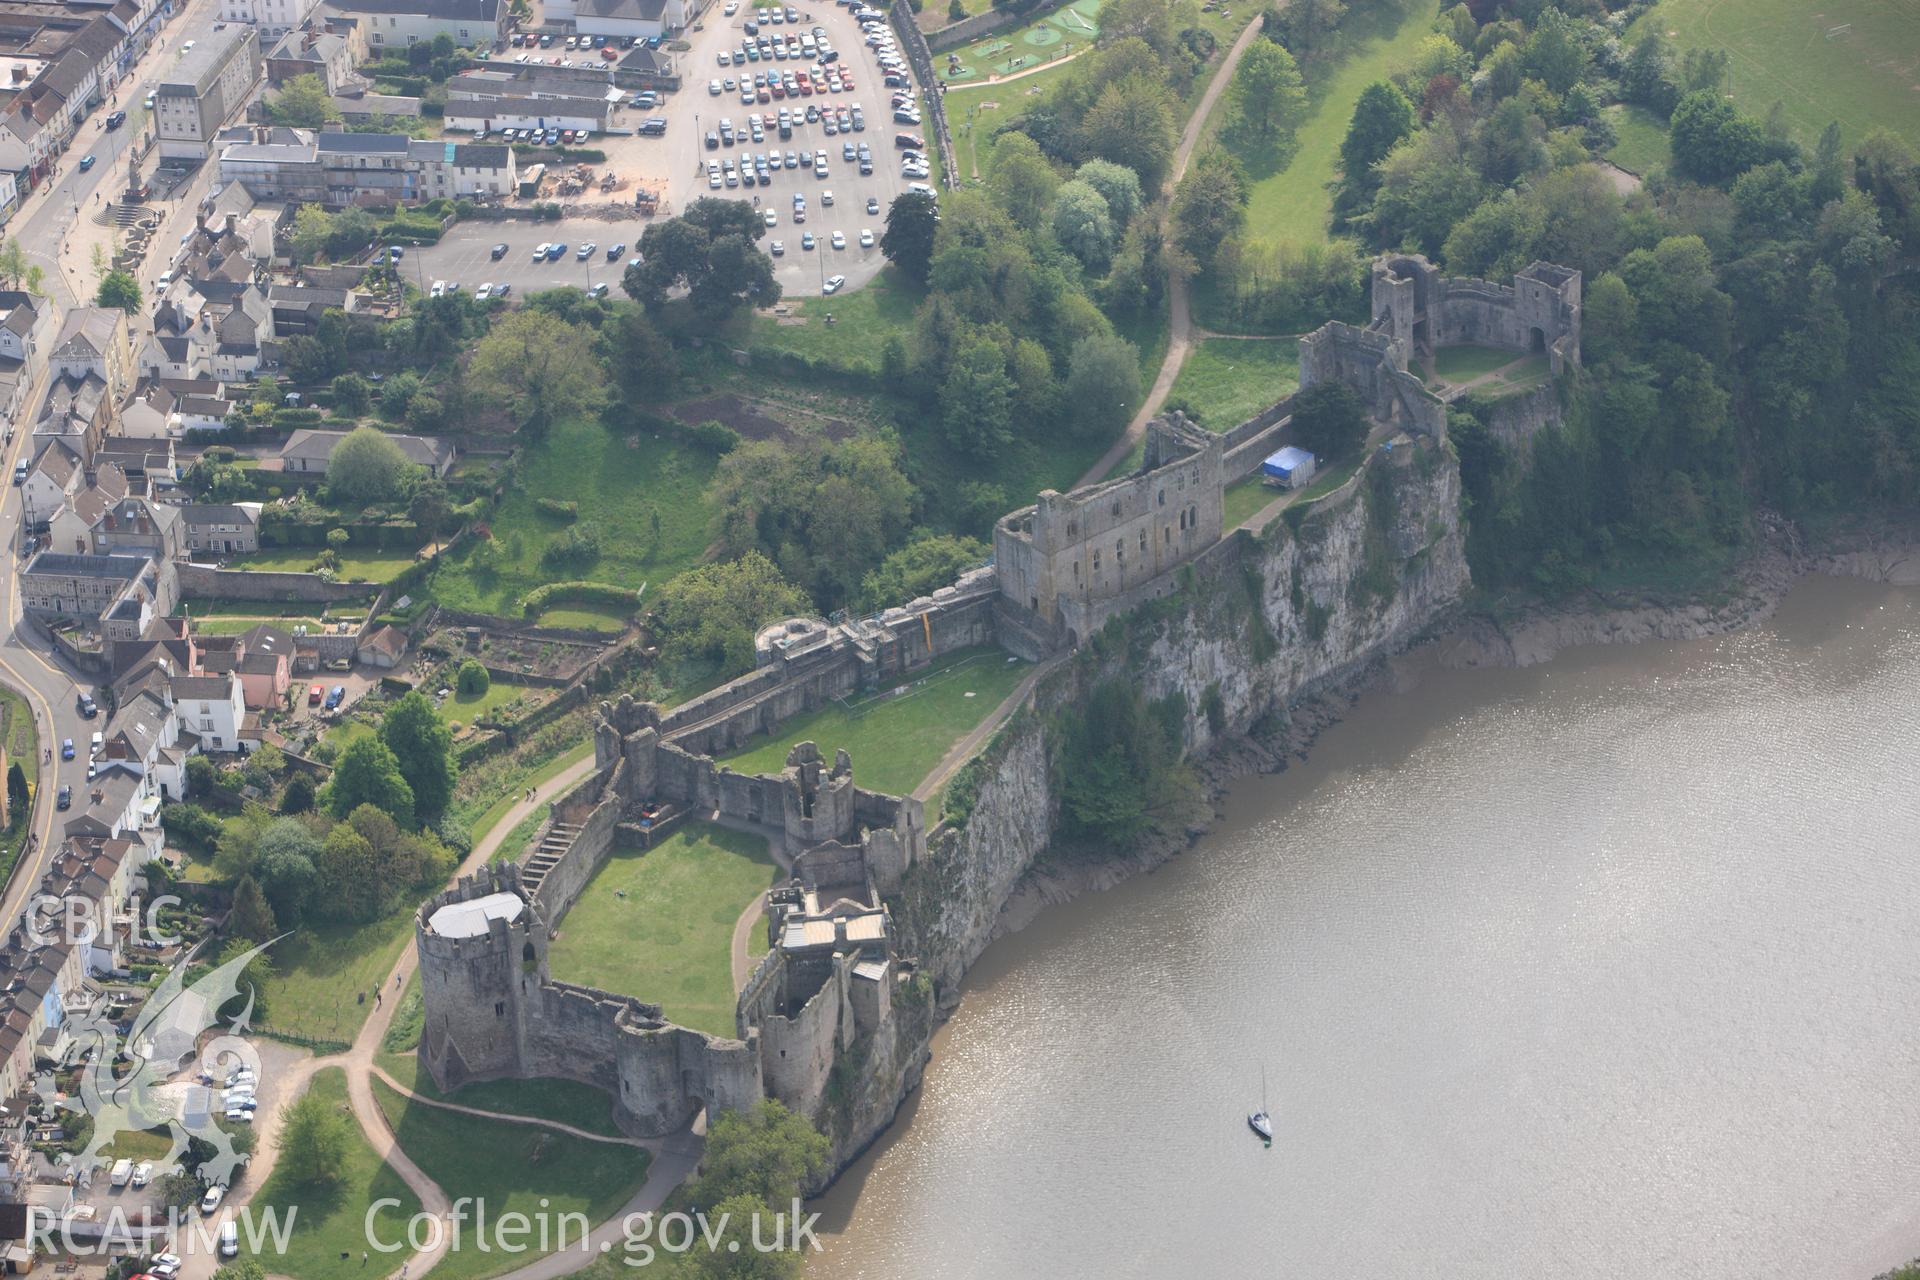 RCAHMW colour oblique photograph of Chepstow Castle. Taken by Toby Driver on 26/04/2011.